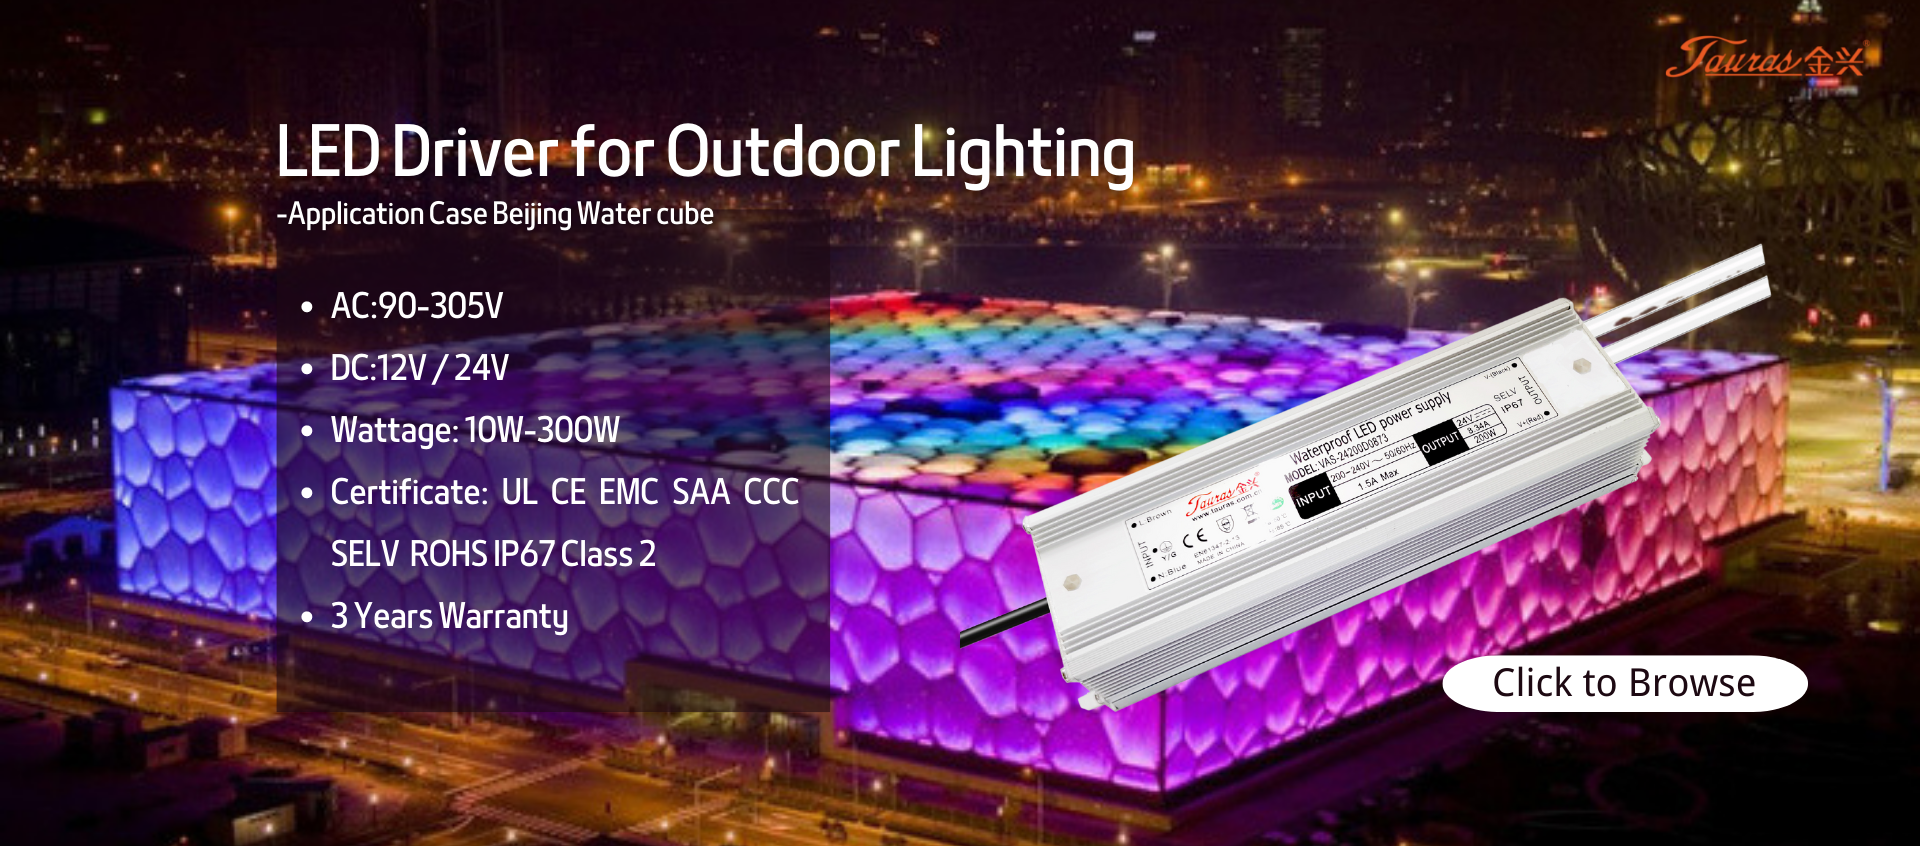 ip67 LED Driver for outdoor lighting banner